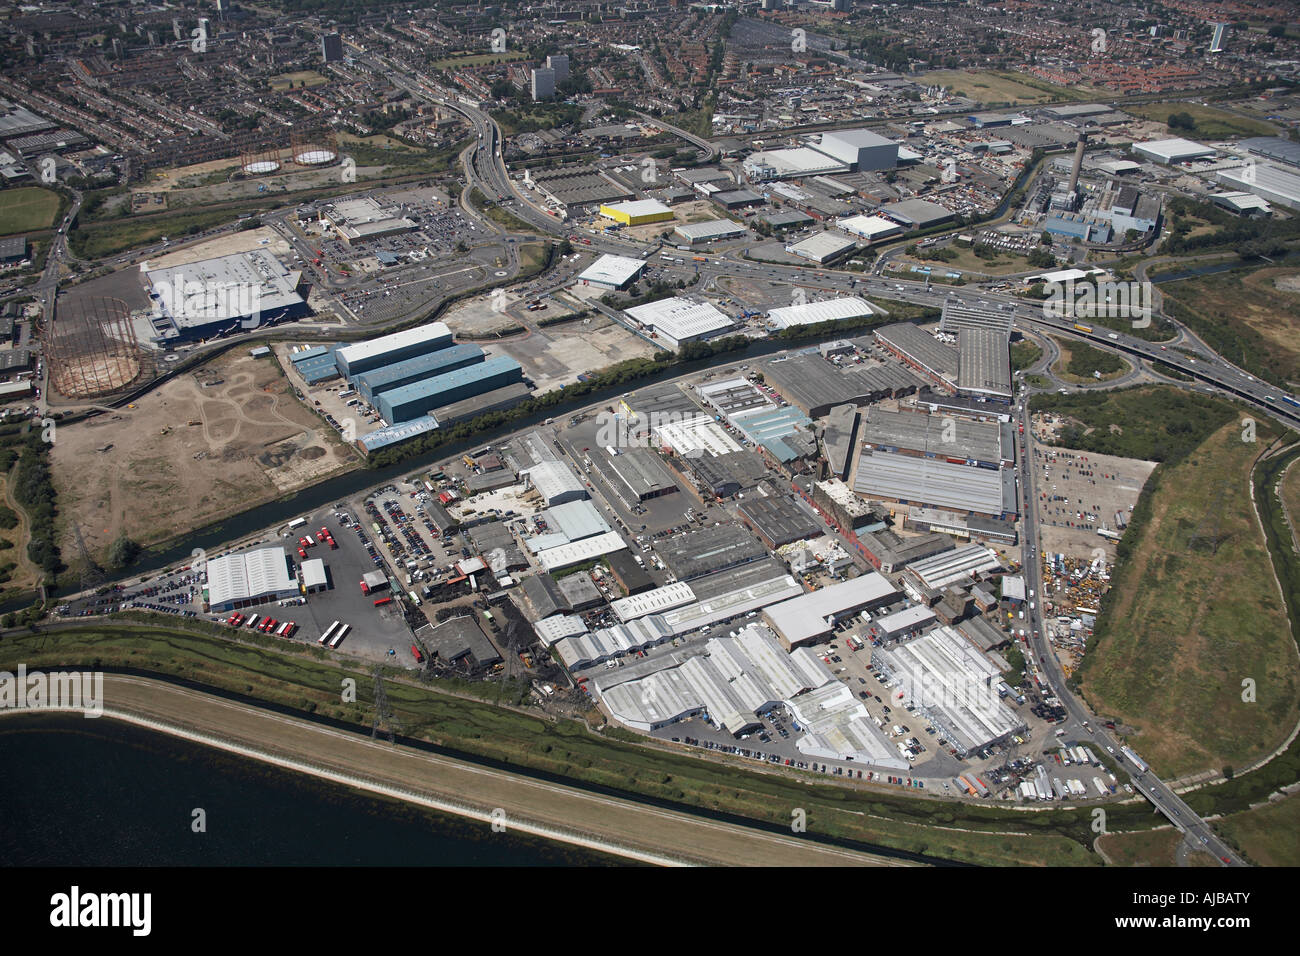 Aerial view east of Lea Valley Trading estate Ikea Edmonton Tesco Superstores Enfield London N18 England UK High level oblique Stock Photo